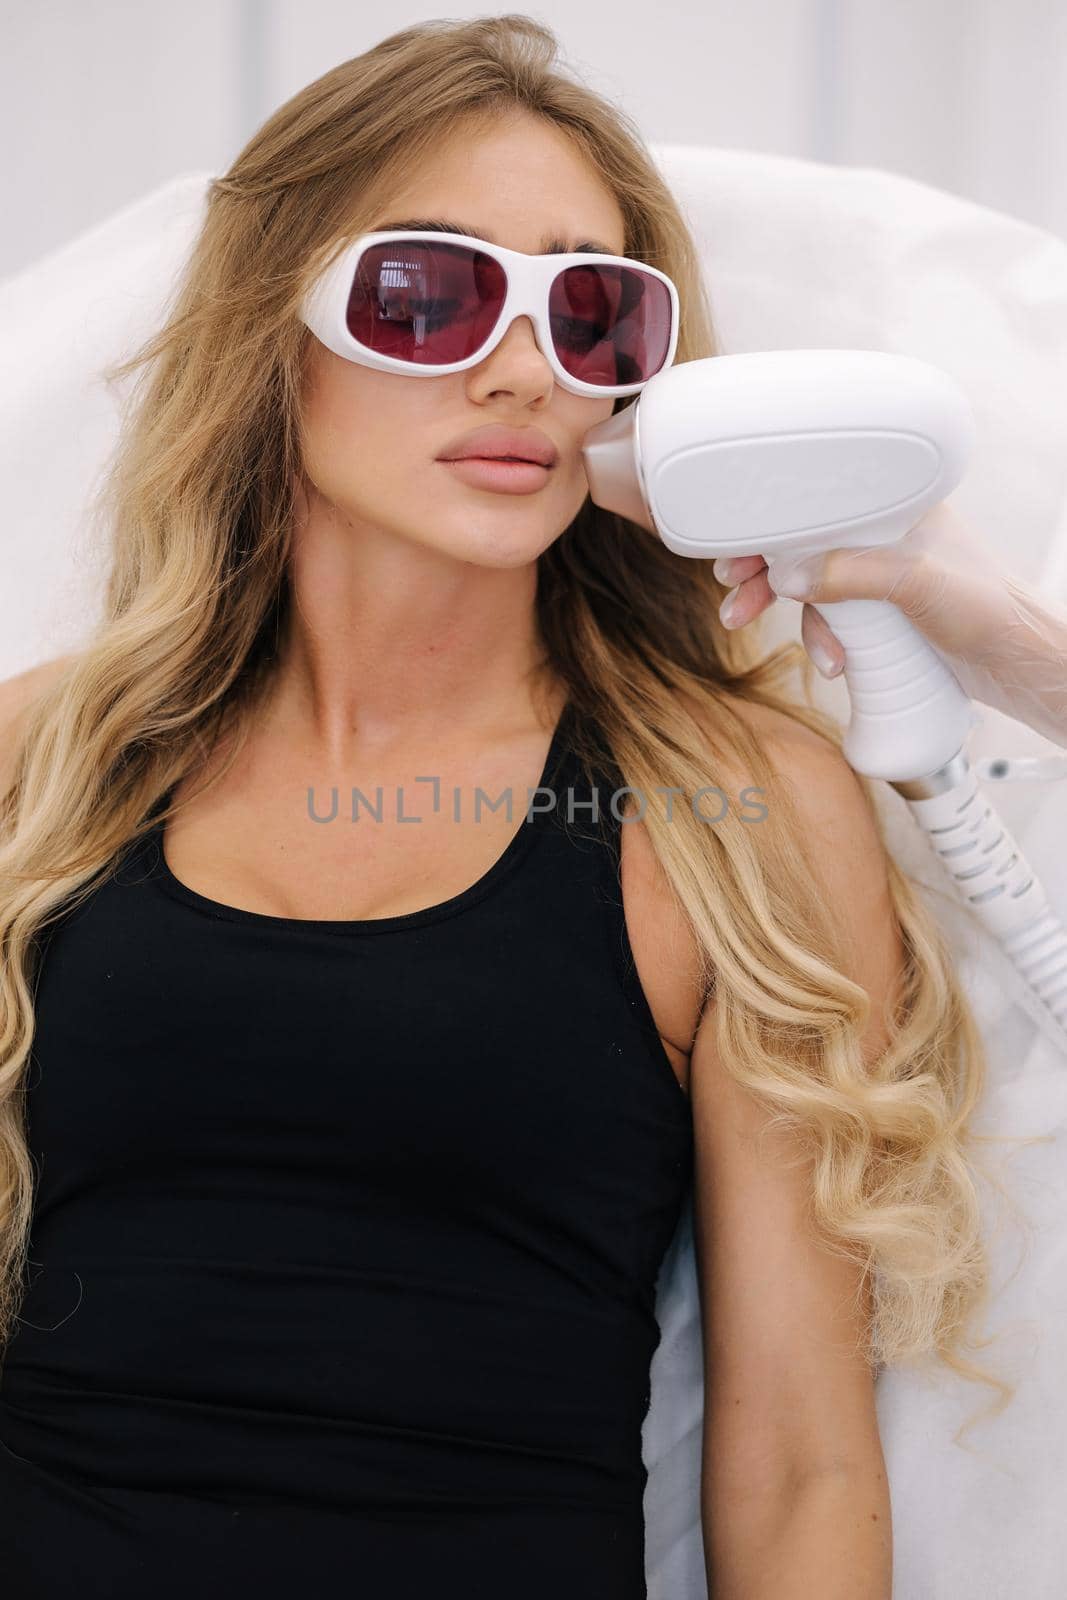 Beautician doing epilation on the face of a beautiful woman in beauty center. Female receiving laser light hair removal treatment for hairless smooth skin at cosmetology salon. Model in protective glasses. Close-up by Gritsiv